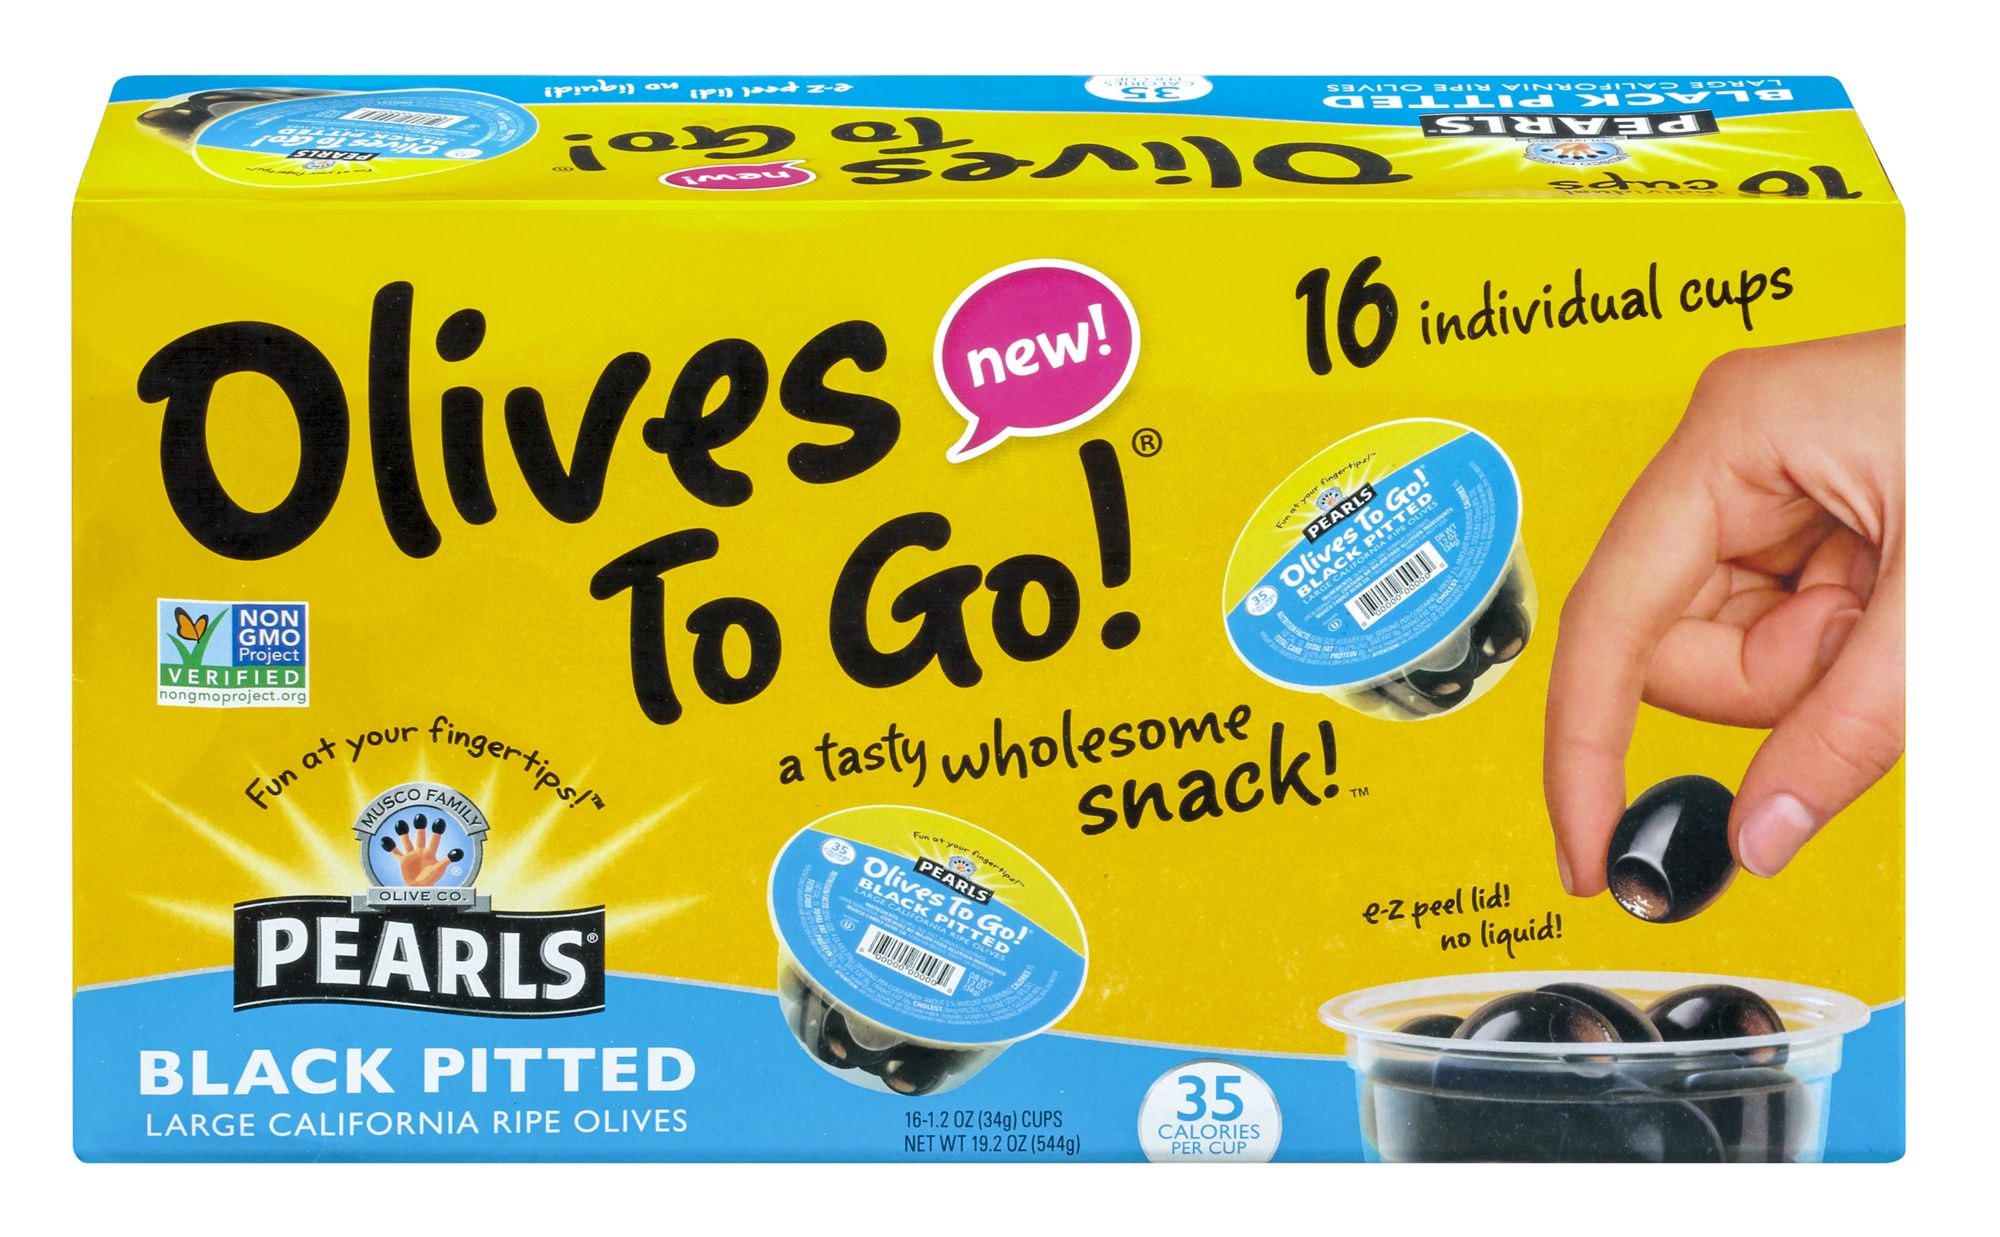 Pearls Black Pitted Olives to Go, 16 ct./1.2 oz.